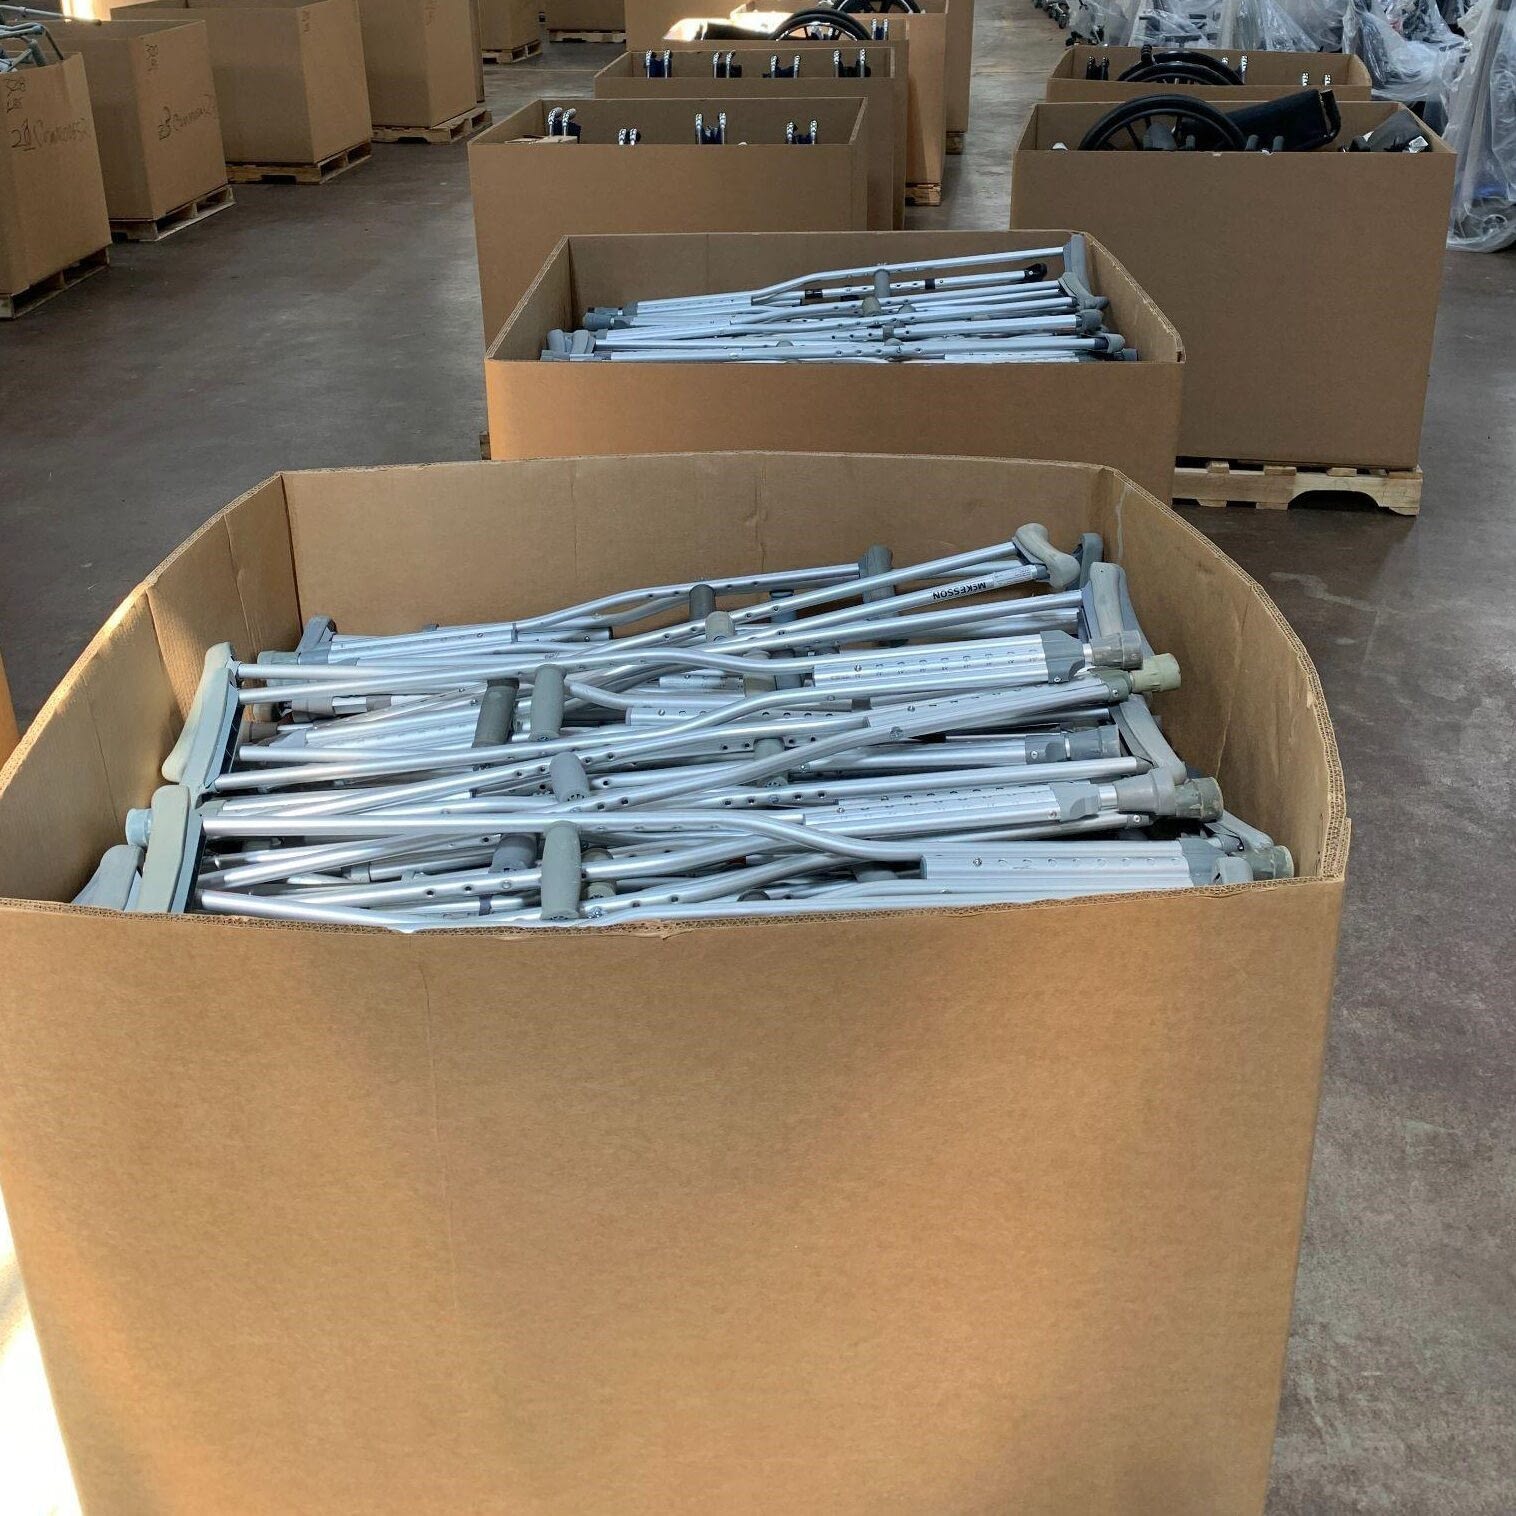 Large cardboard boxes filled with pairs of crutches